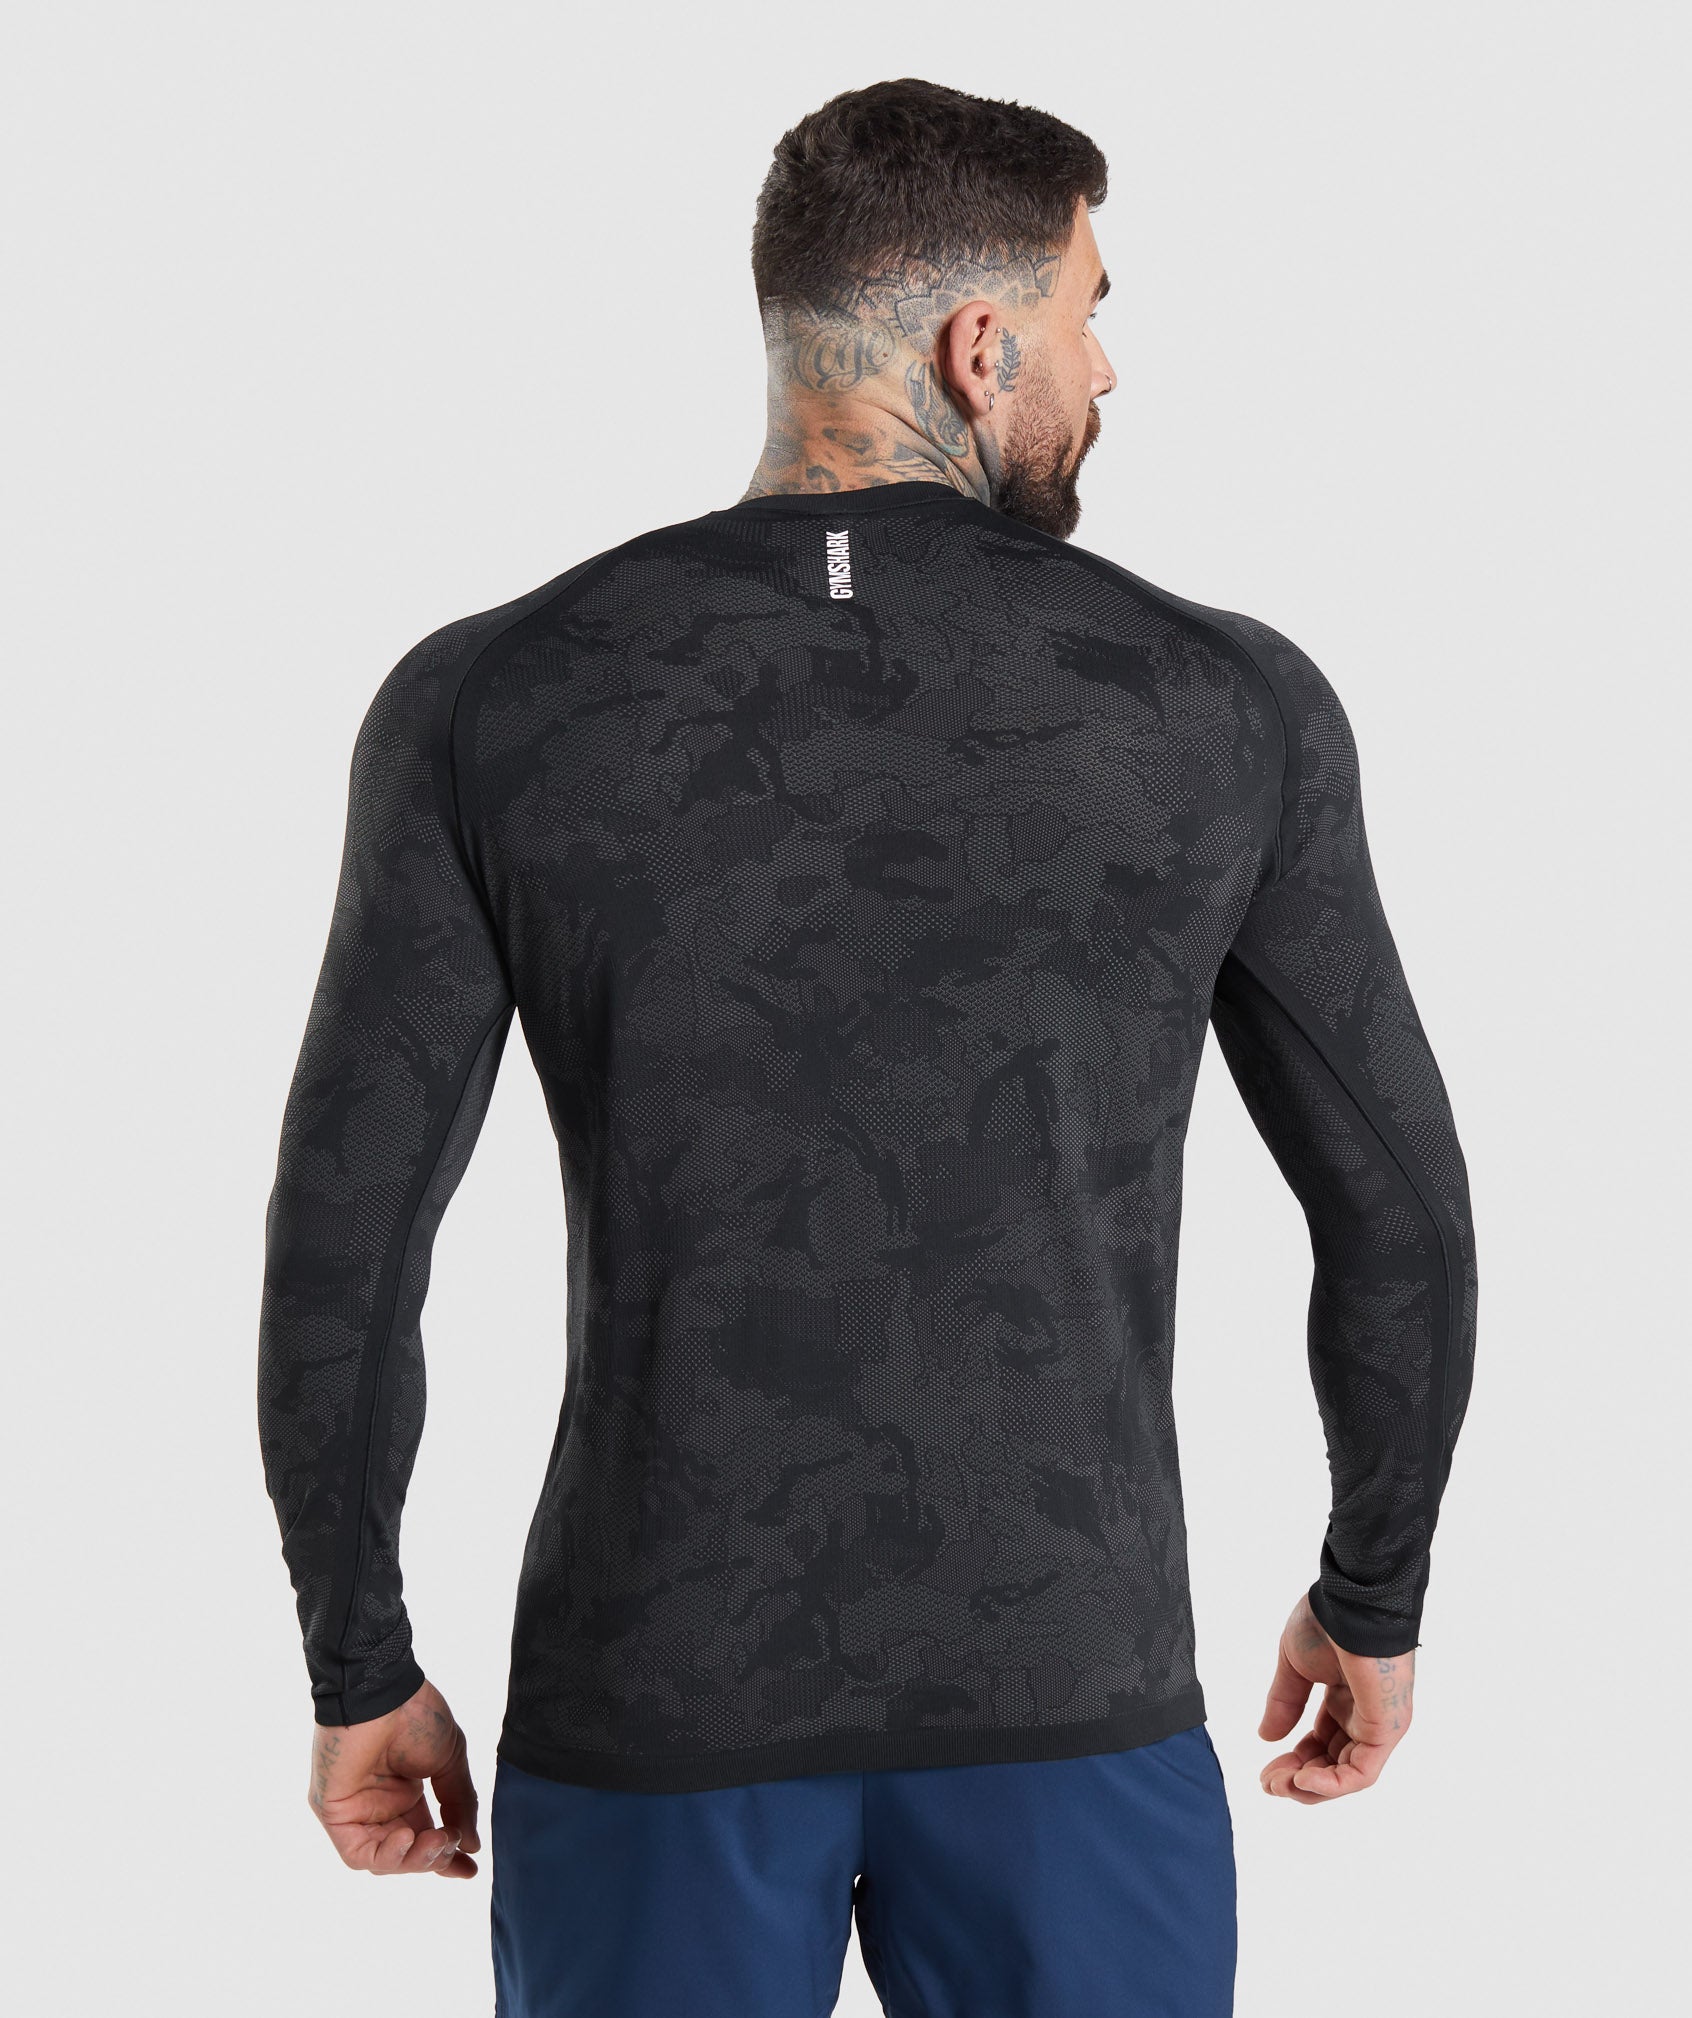 Geo Seamless Long Sleeve T-Shirt in Black/Charcoal Grey - view 2